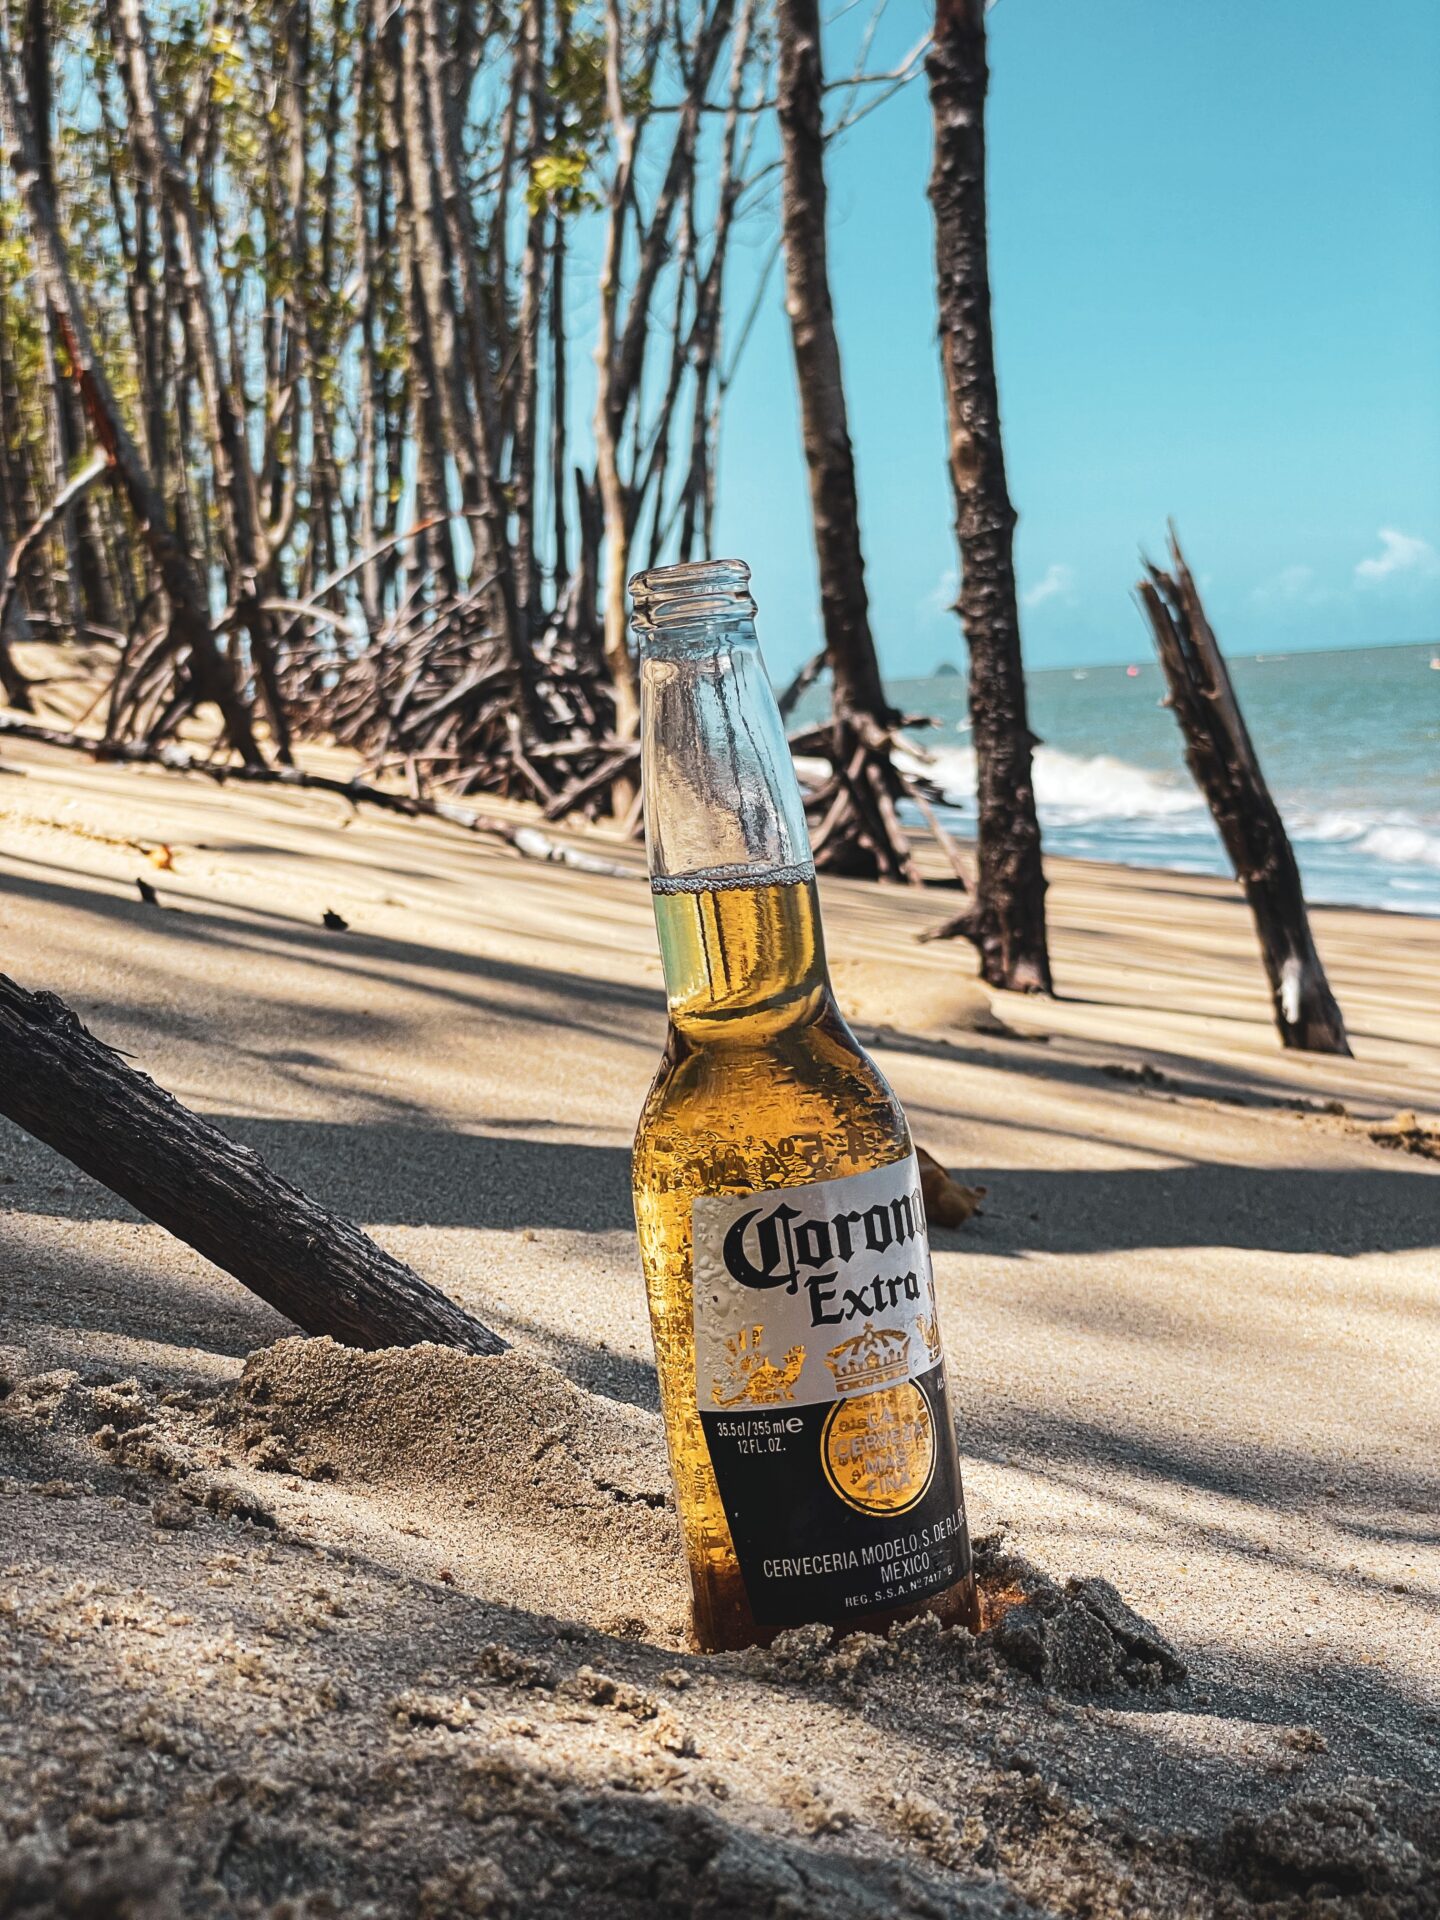 a bottle of corona extra stands on the beach on the sand